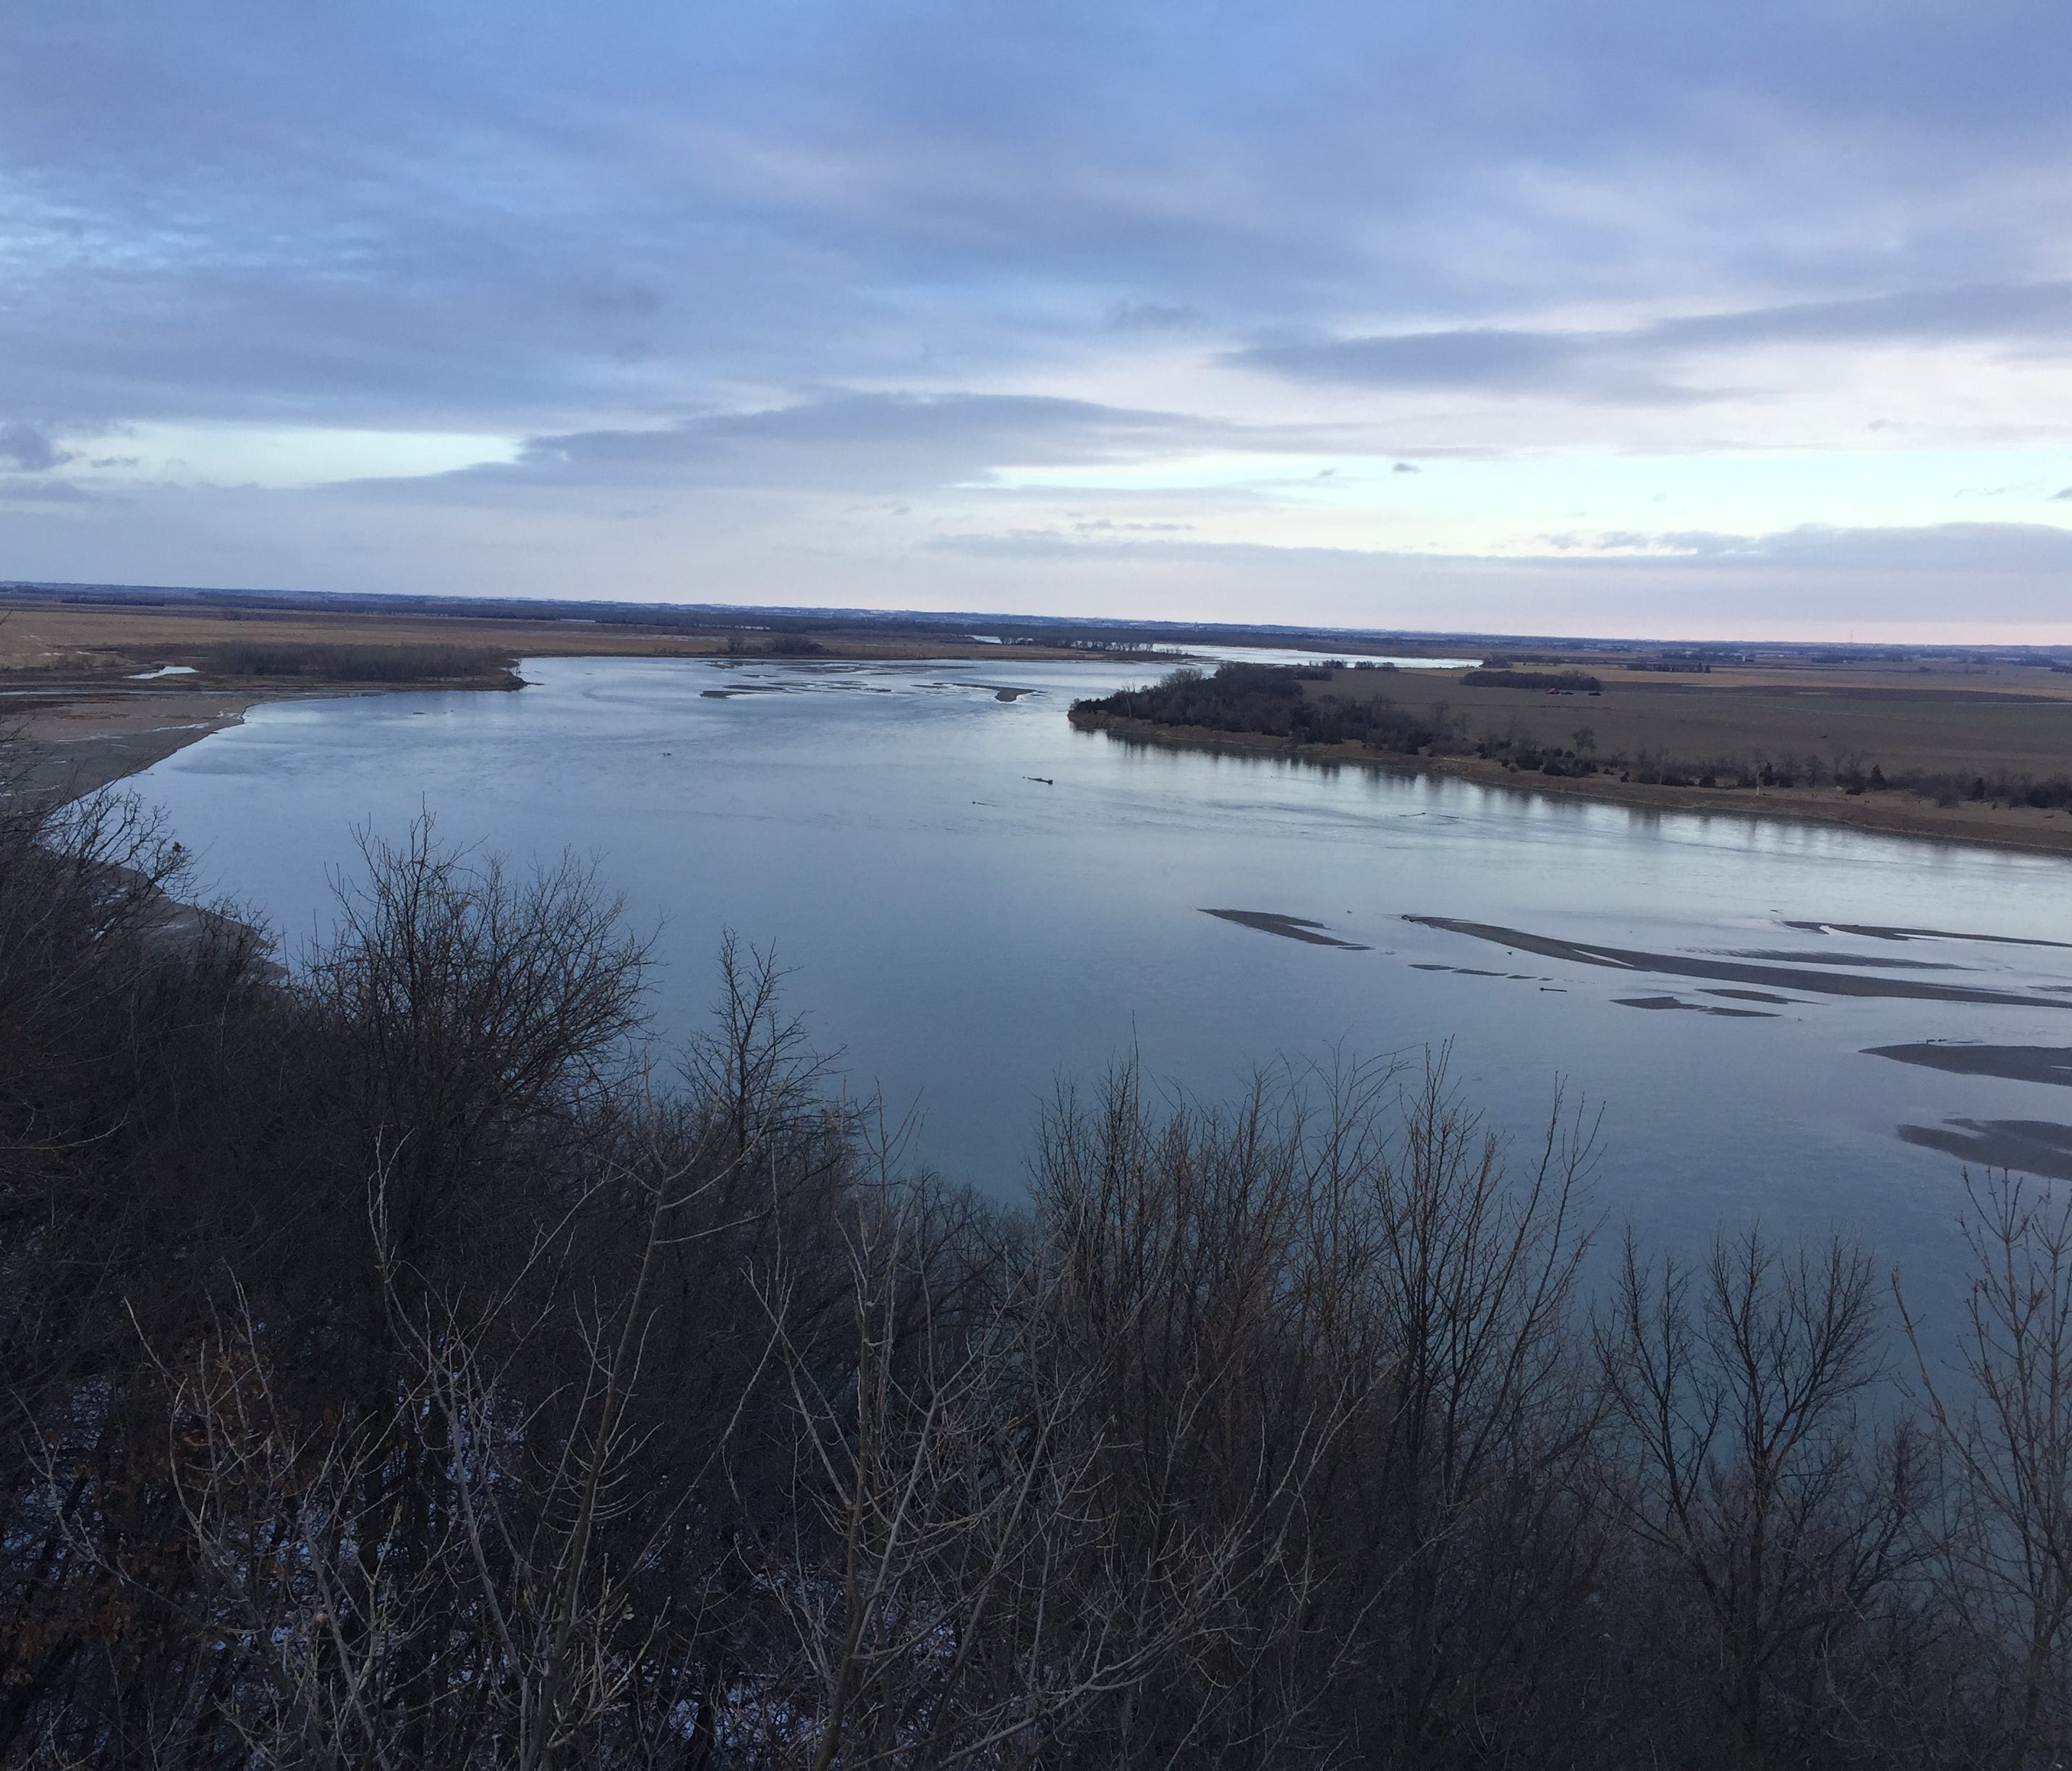 Nebraska's Ponca State Park affords a commanding view of a free-flowing section of the Missouri River, designated as the Missouri National Recreational River. The park is near the eastern point of a 59-mile stretch of the MNRR and is a popular takeou